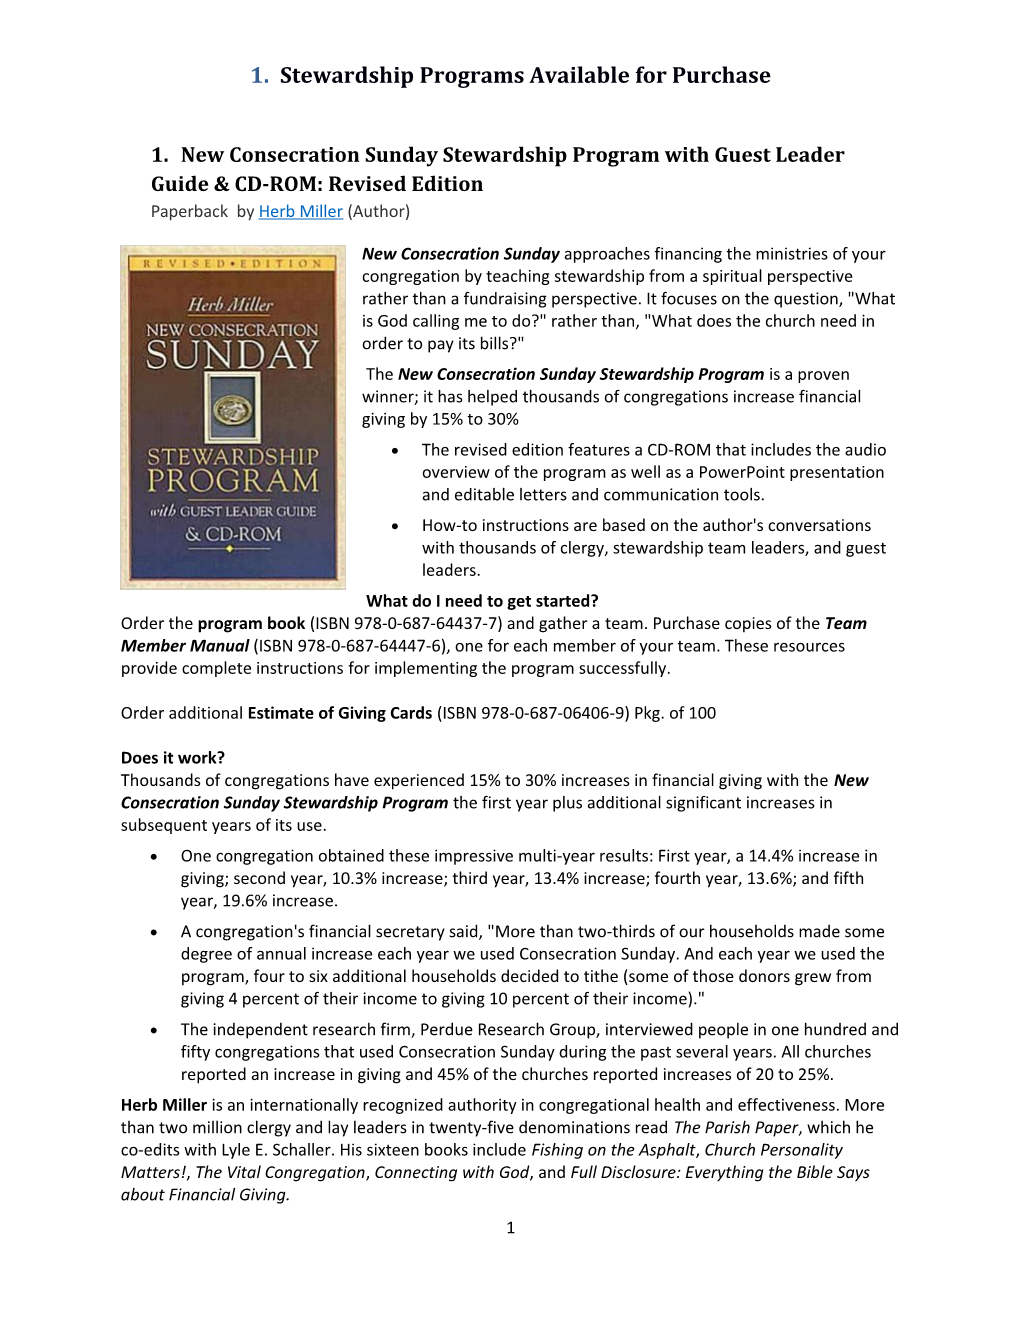 1.New Consecration Sunday Stewardship Program with Guest Leader Guide & CD-ROM:Revised Edition